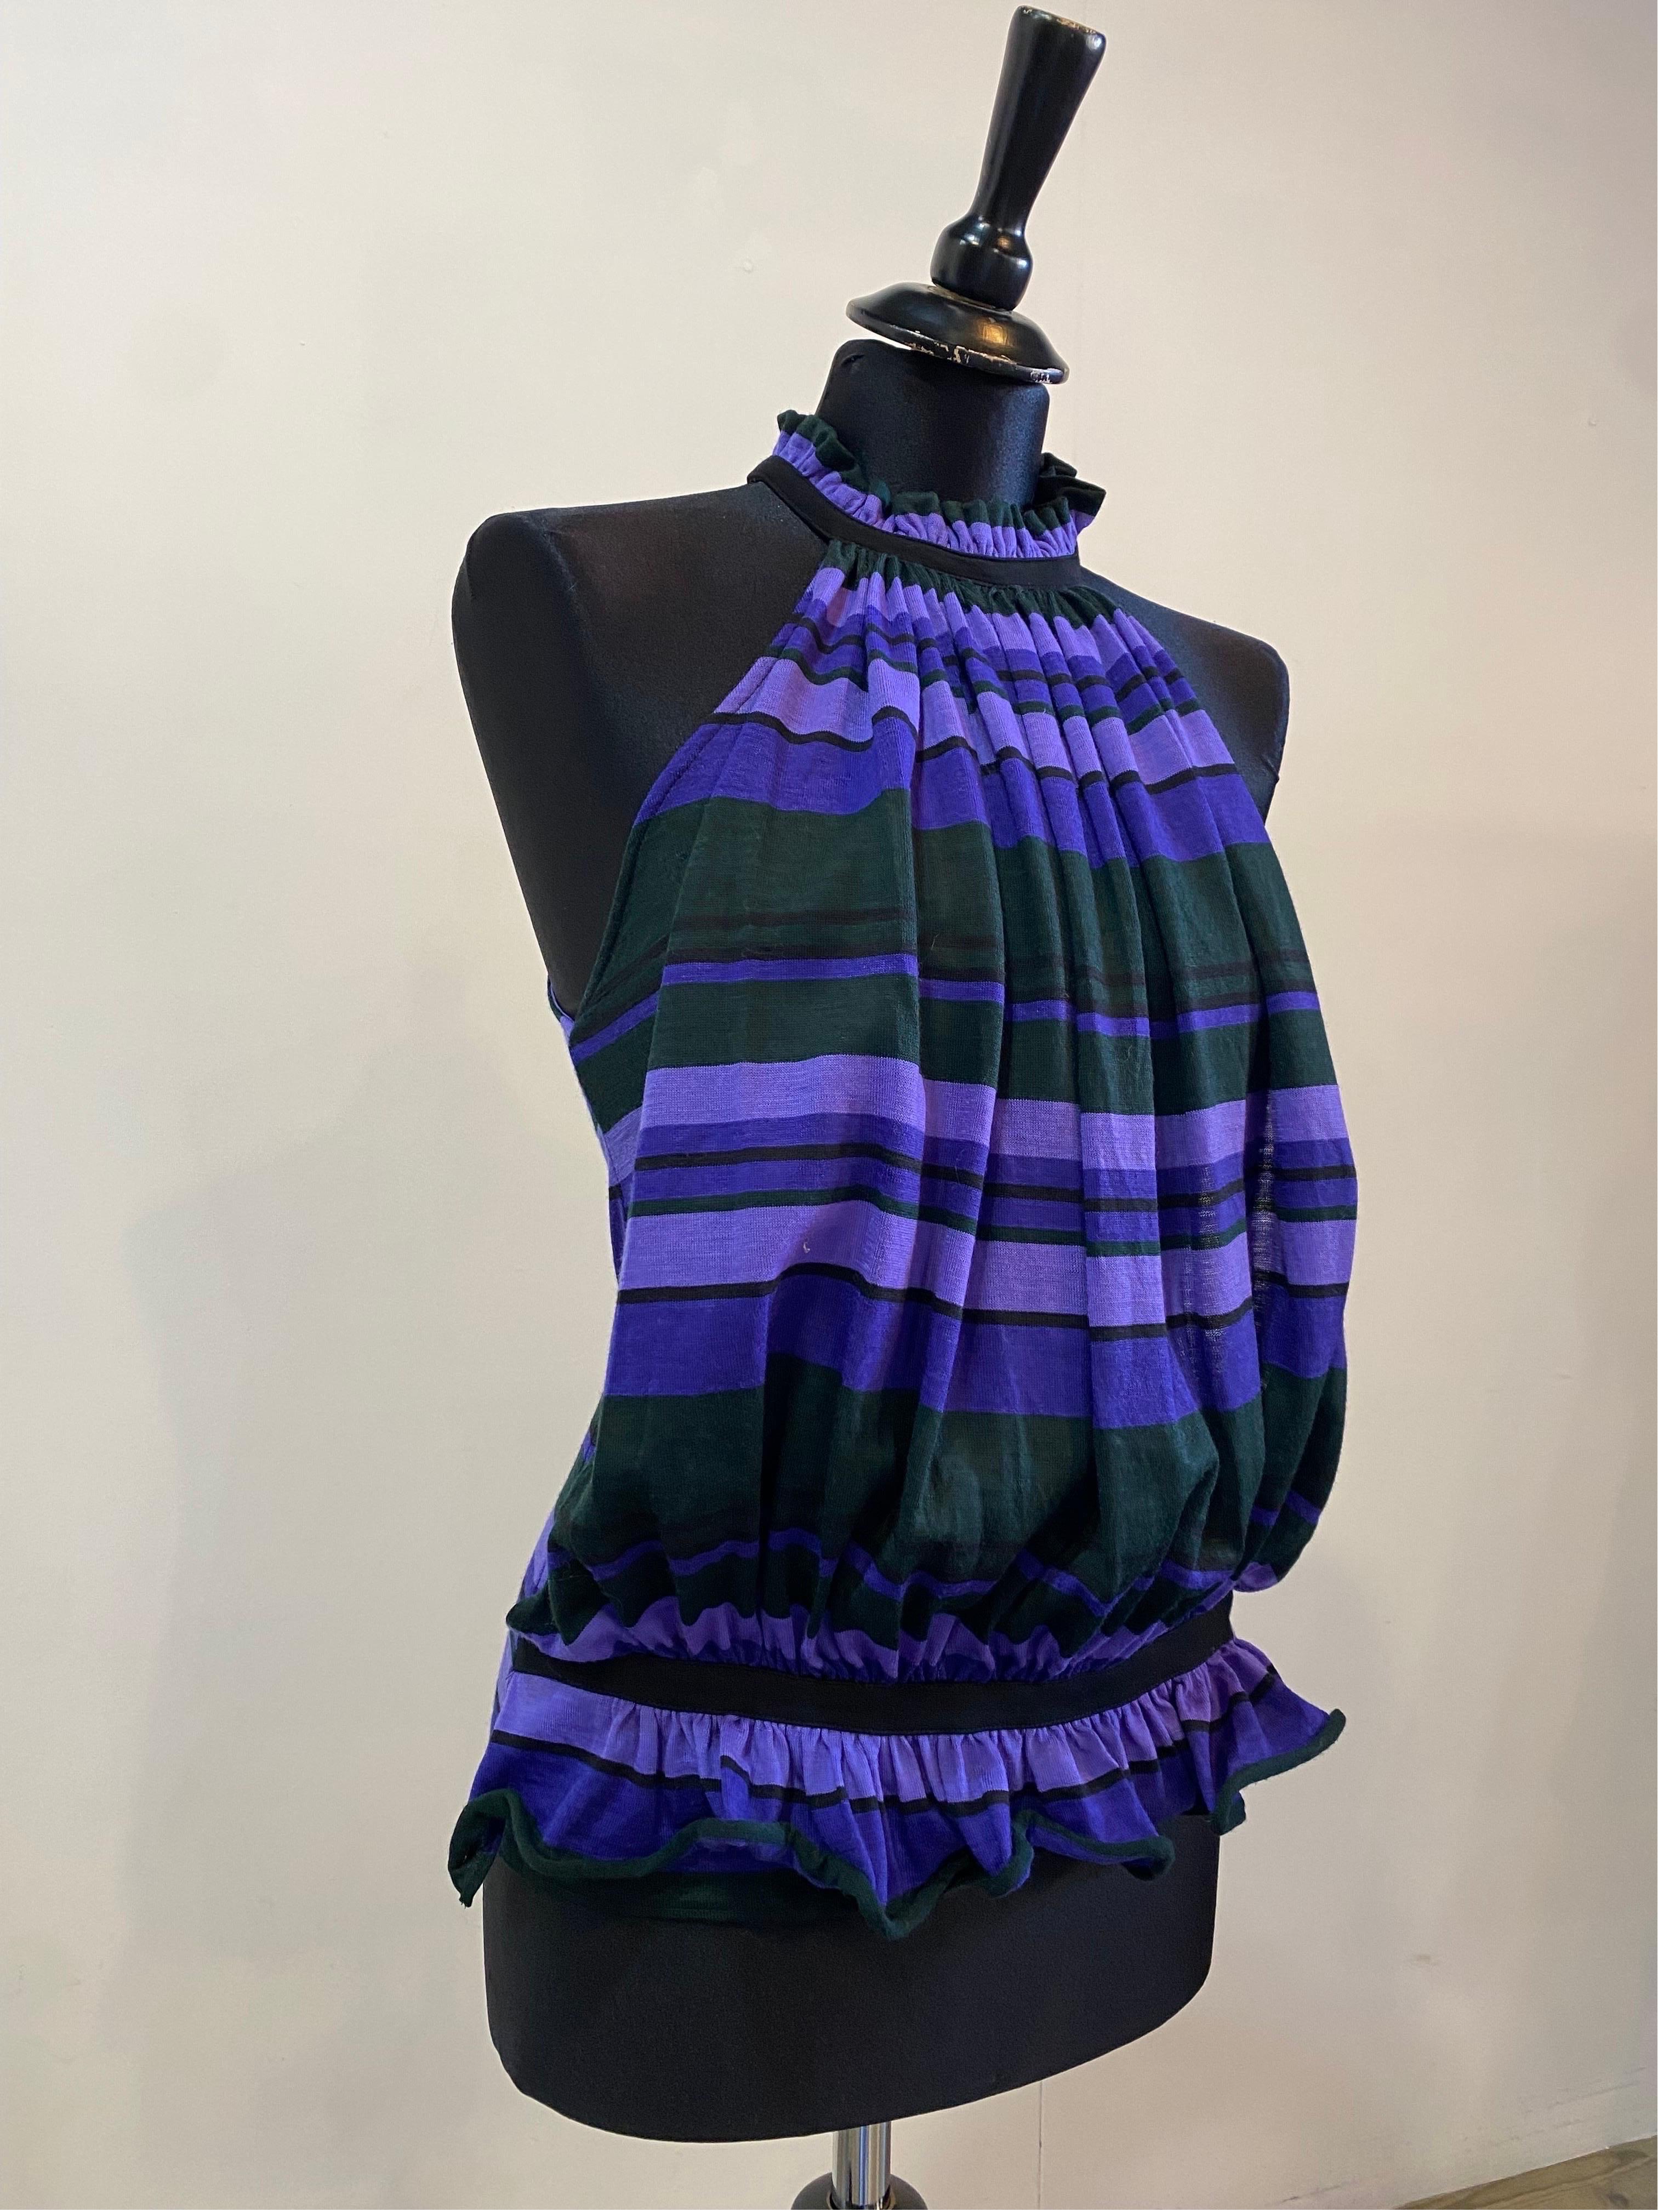 Balenciaga Top.
Striped pattern in shades of purple.
Primary fabric: wool.
Back zip closure.
French size 36 which corresponds to an Italian 40.
Bust 38 cm
Length 66 cm
Good general condition, shows signs of normal use.